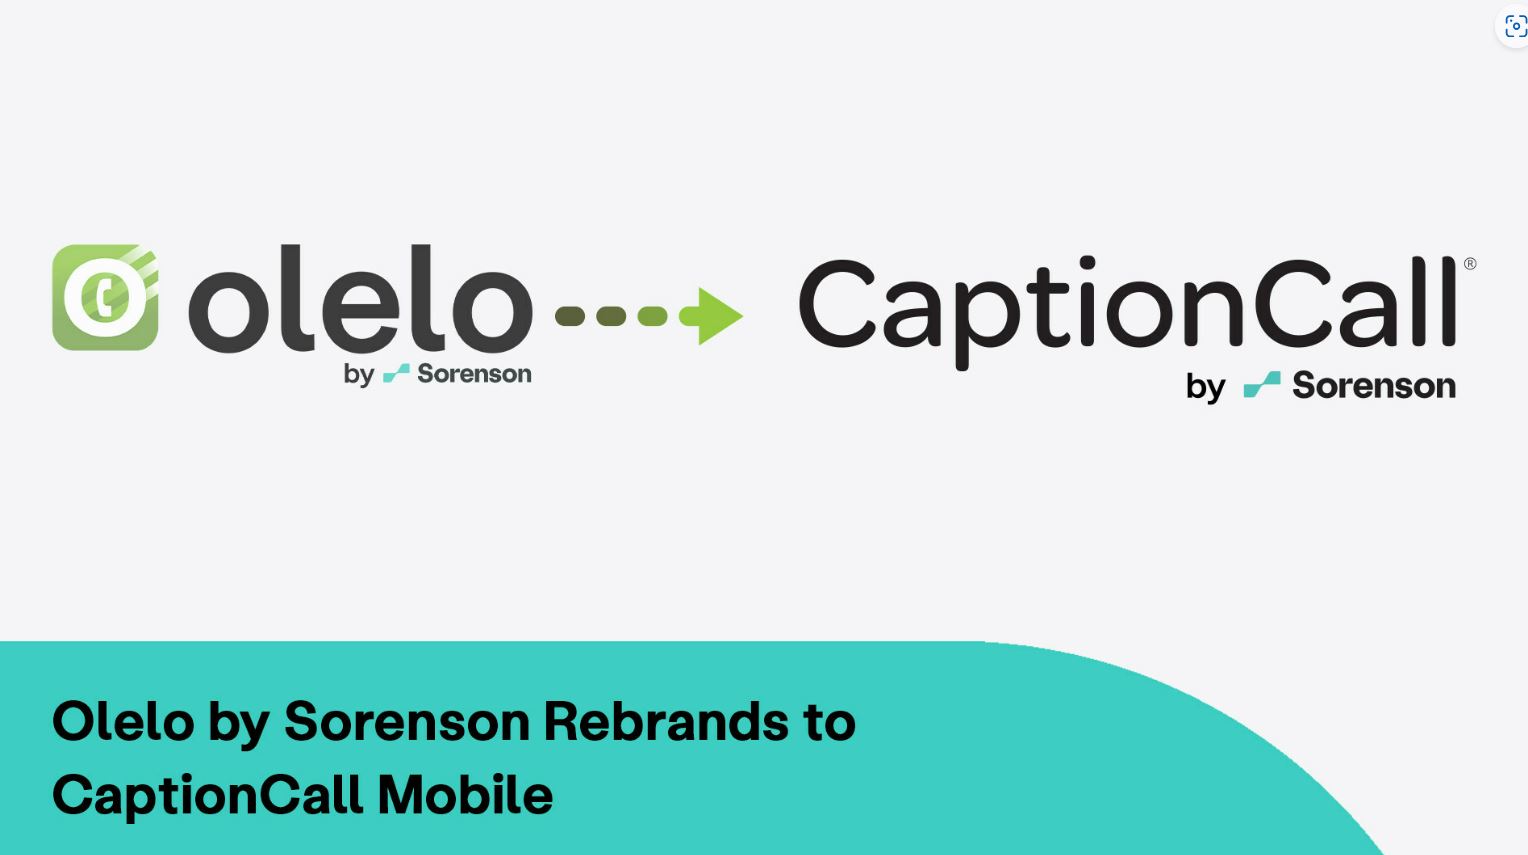 Featured image for “Olelo by Sorenson Rebrands to CaptionCall Mobile”